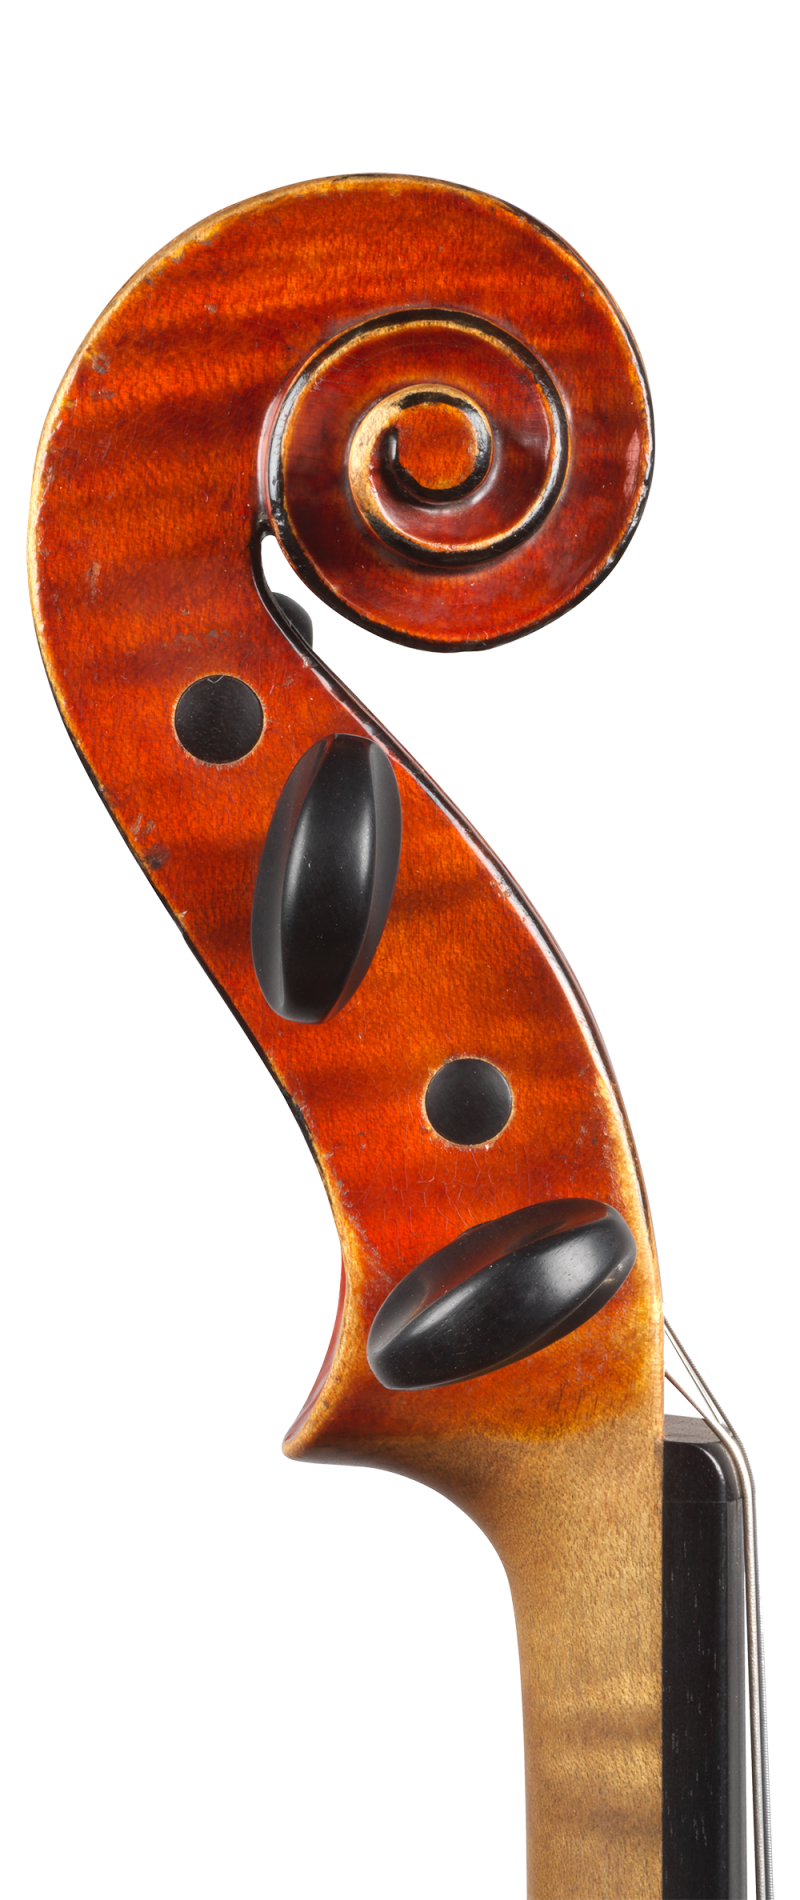 Scroll of a violin by Annibale Fagnola, Turin, 1923